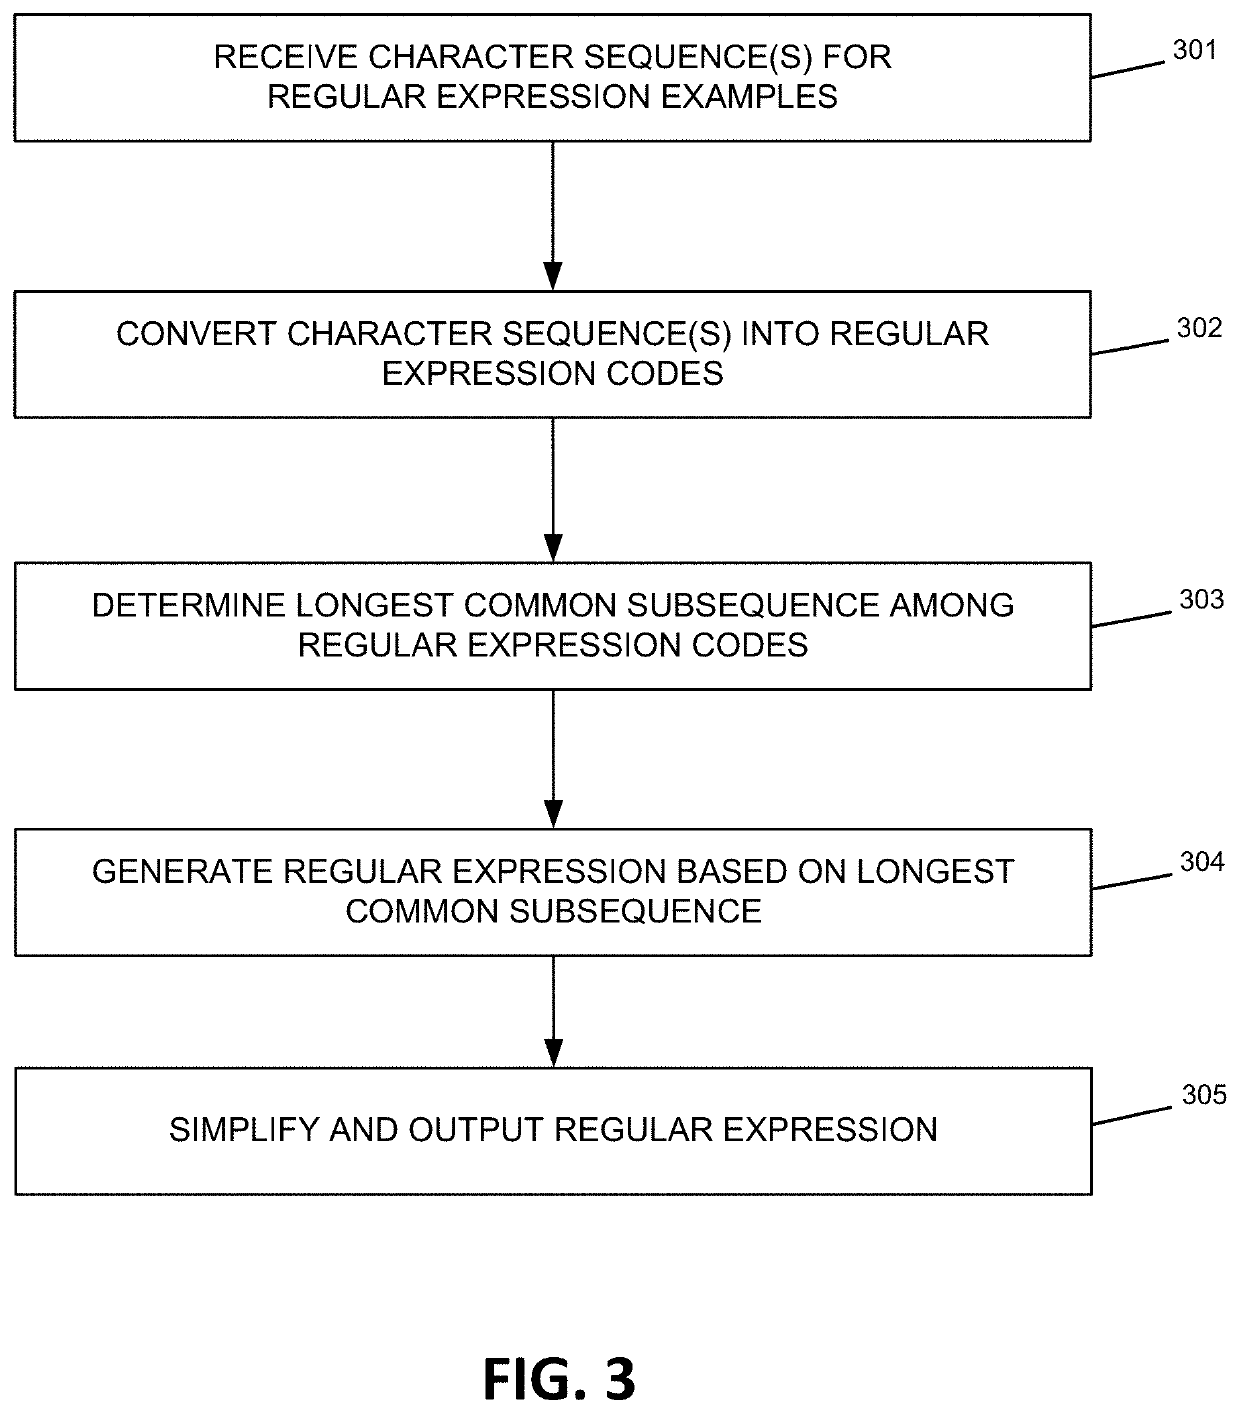 Regular expression generation using longest common subsequence algorithm on spans